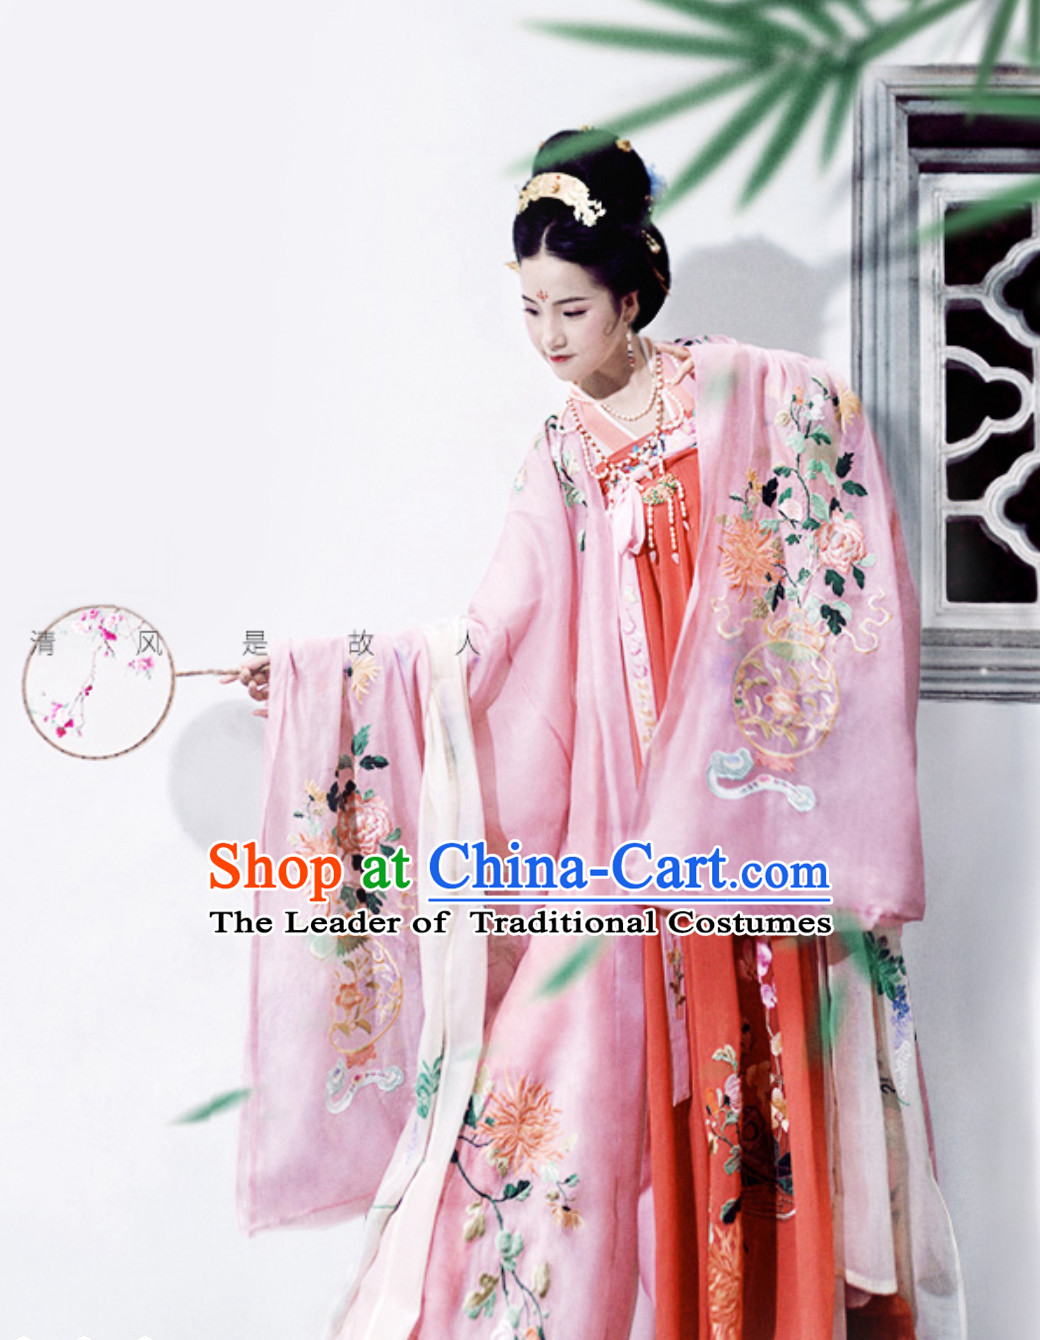 Clothes Female Costume Sets Traditional Chinese Clothing Tang Dynasty  Clothing